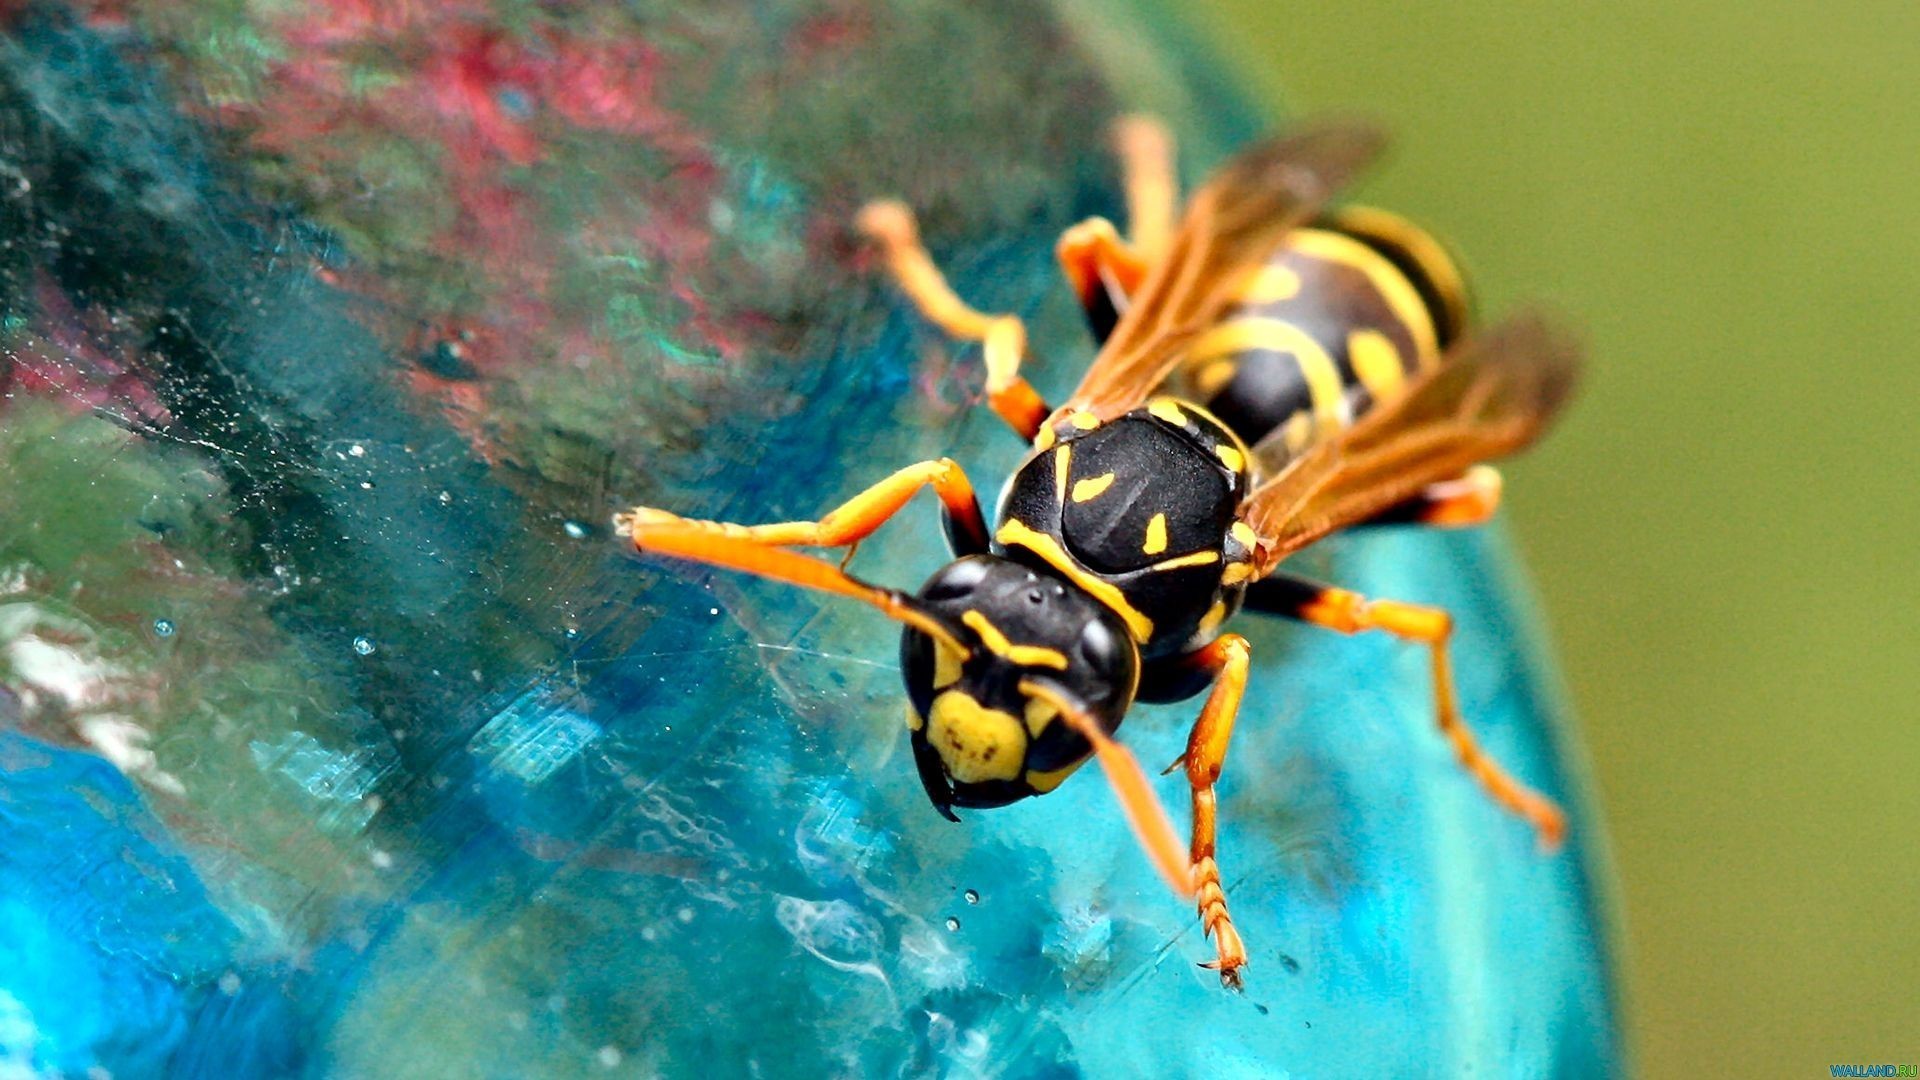 Wasps Nature Insect Closeup Photography 1920x1080